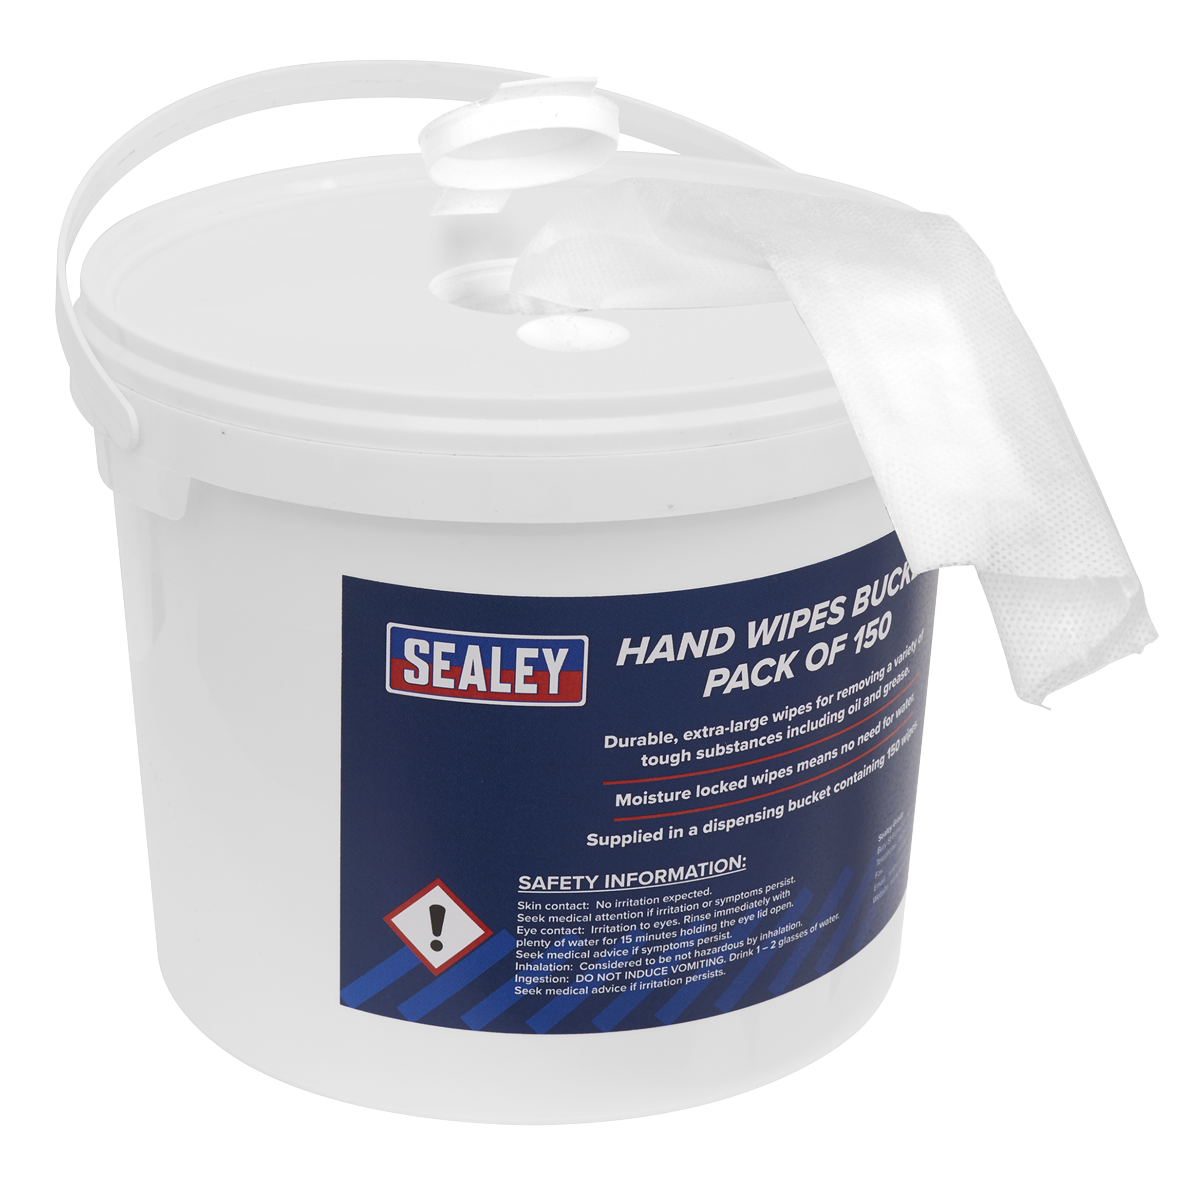 Sealey SCW3 Hand Wipes Bucket - Pack of 150